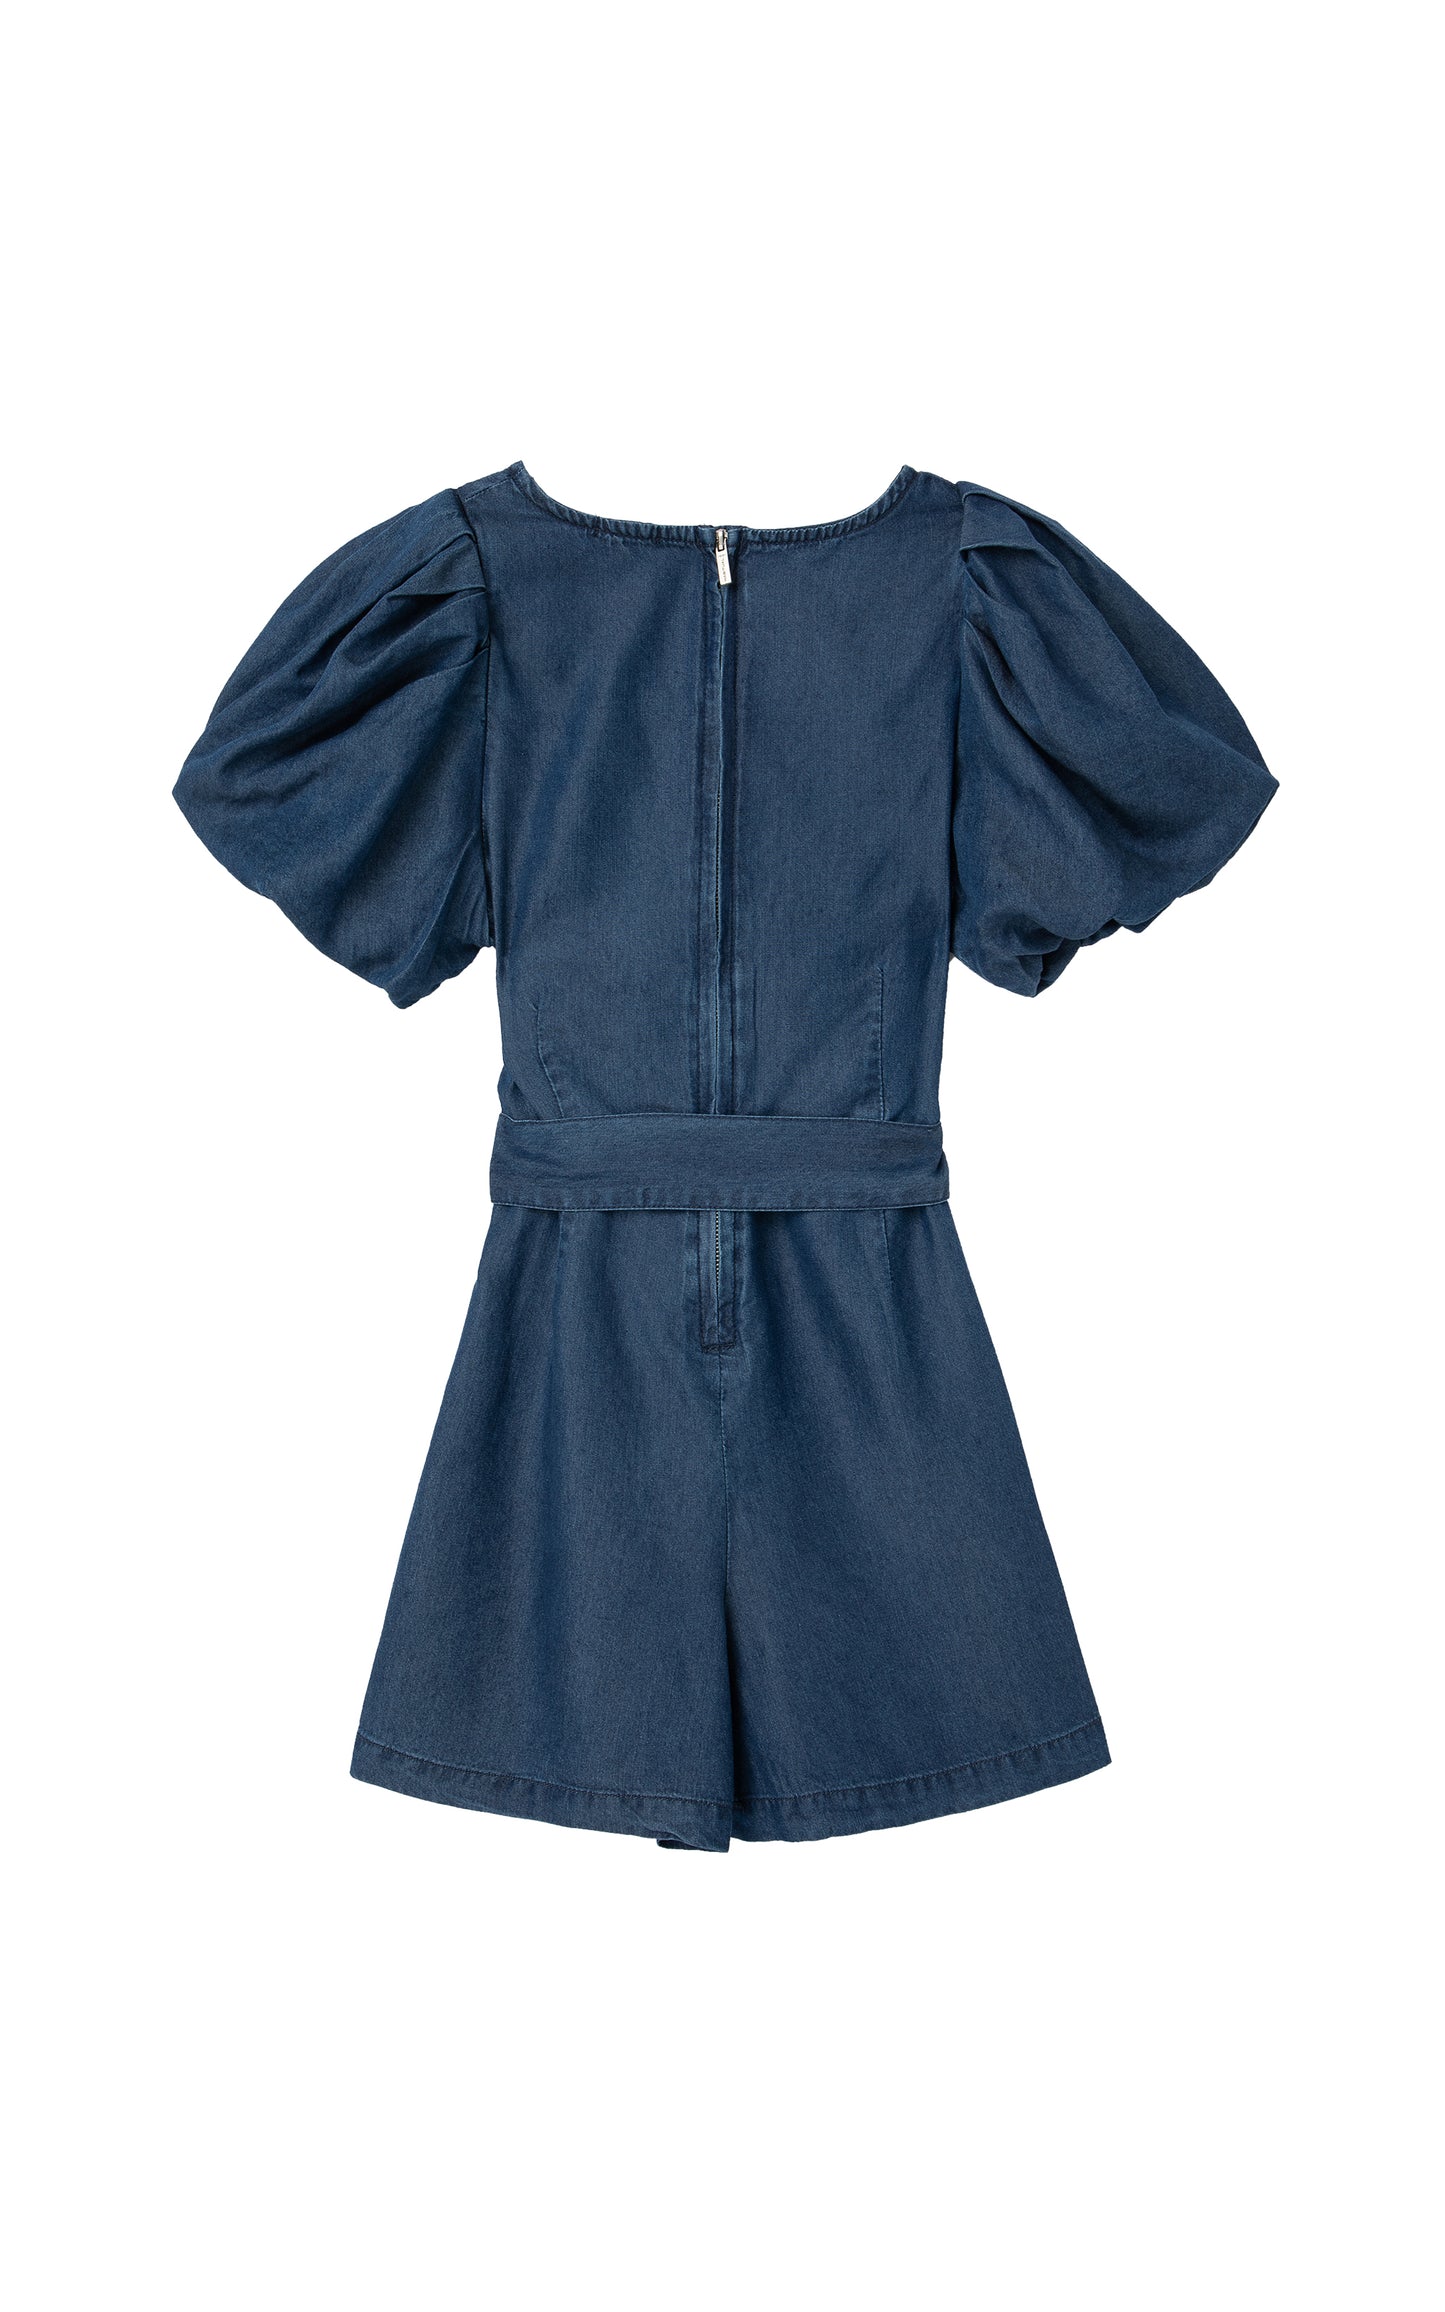 Back of denim exaggerated sleeve romper with ties